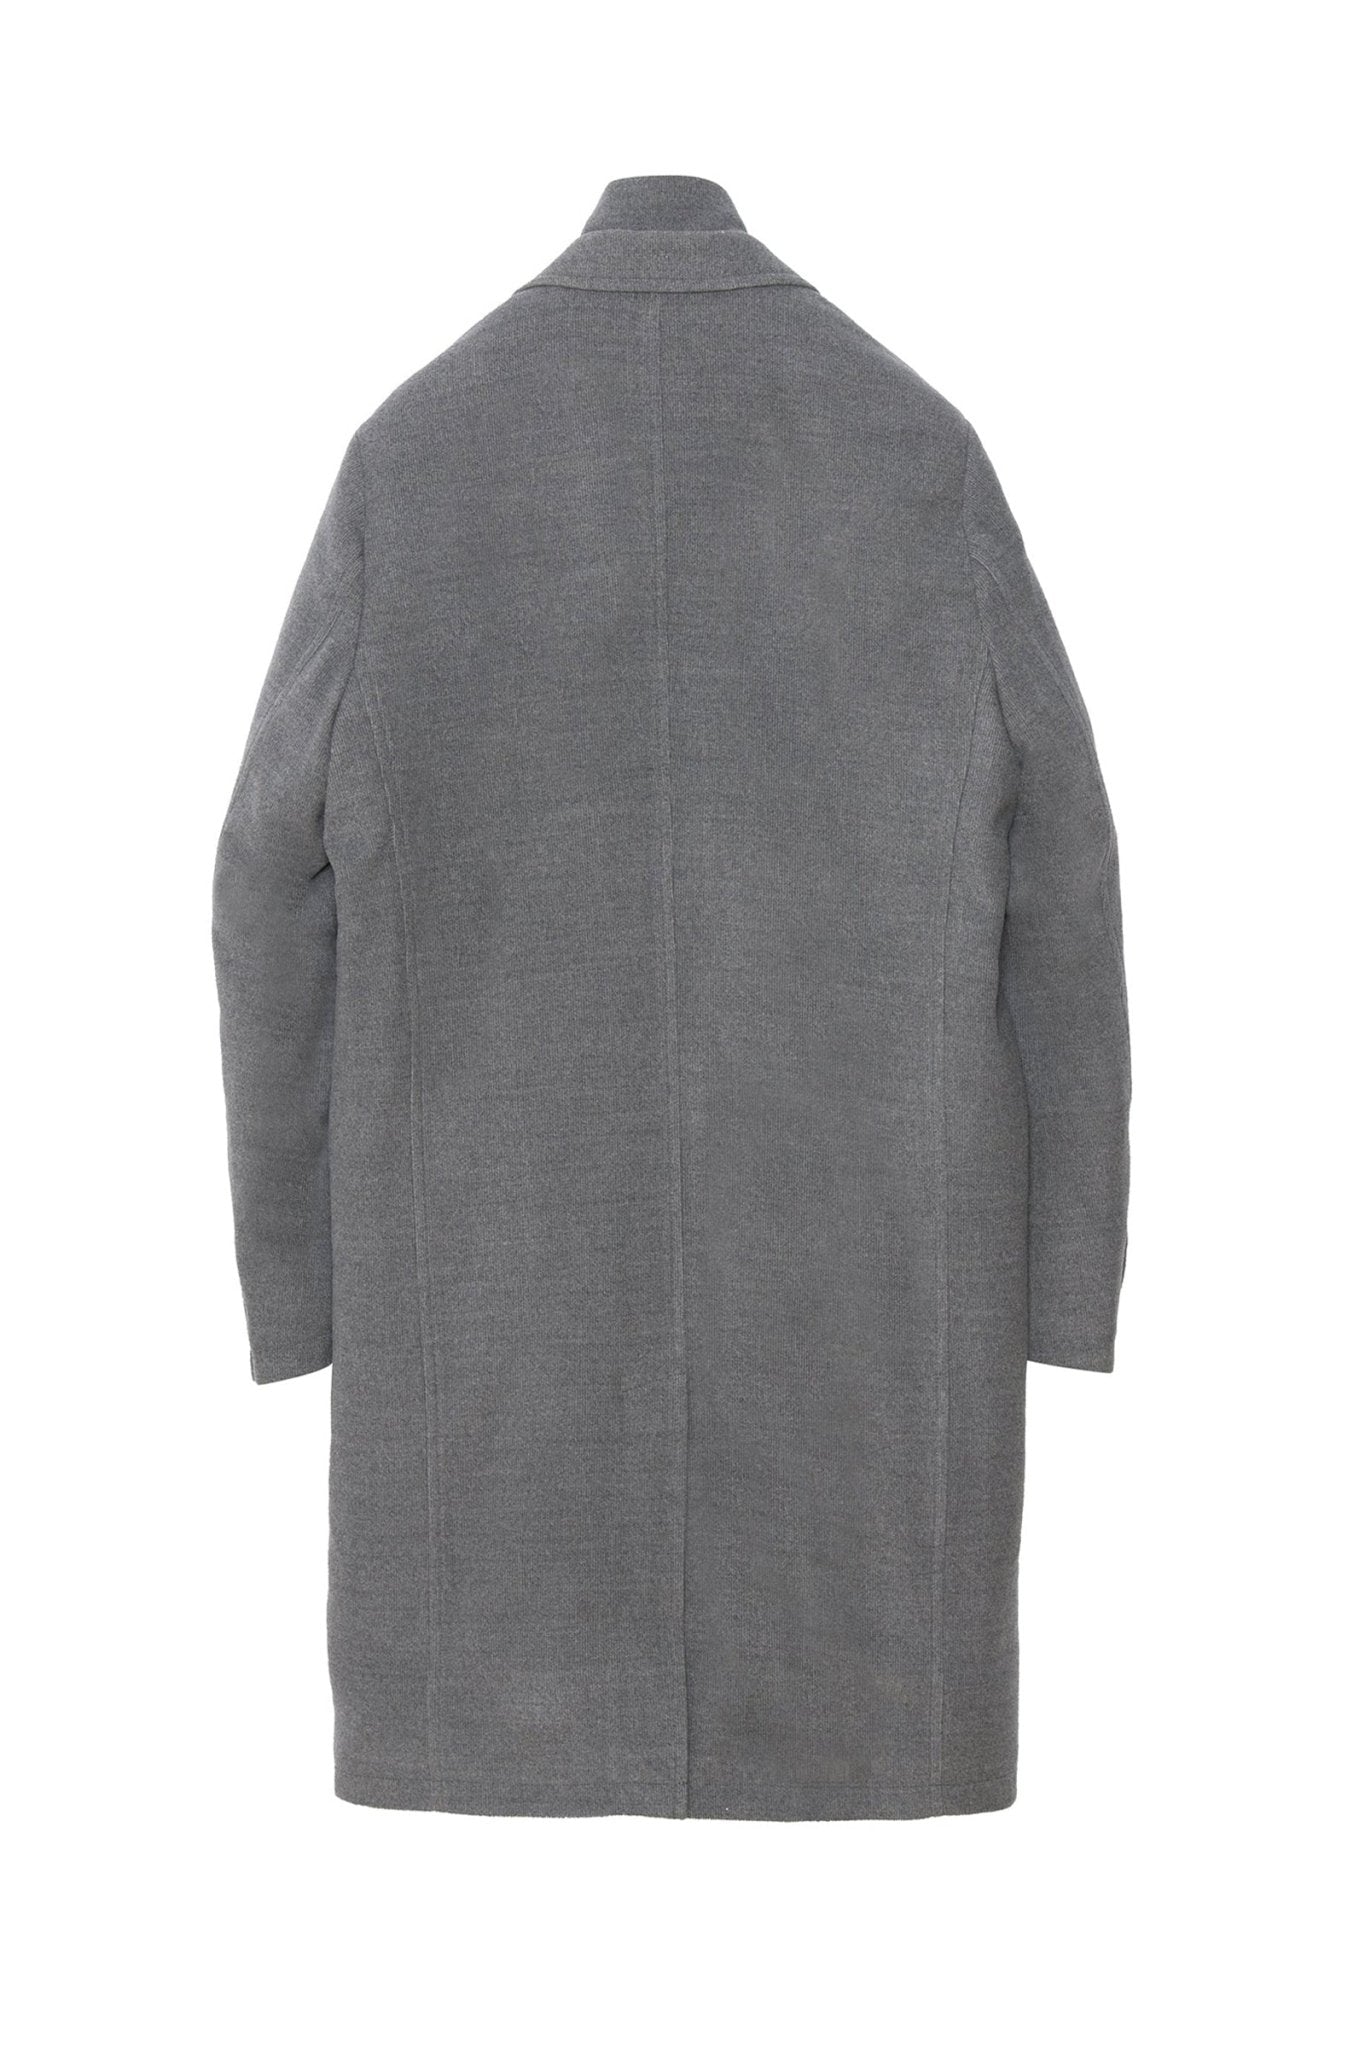 LIMITED EDITION: TOWNSEND GREY WOOL OVERCOAT - Cardinal of Canada-US-LIMITED EDITION: TOWNSEND GREY WOOL TOPCOAT